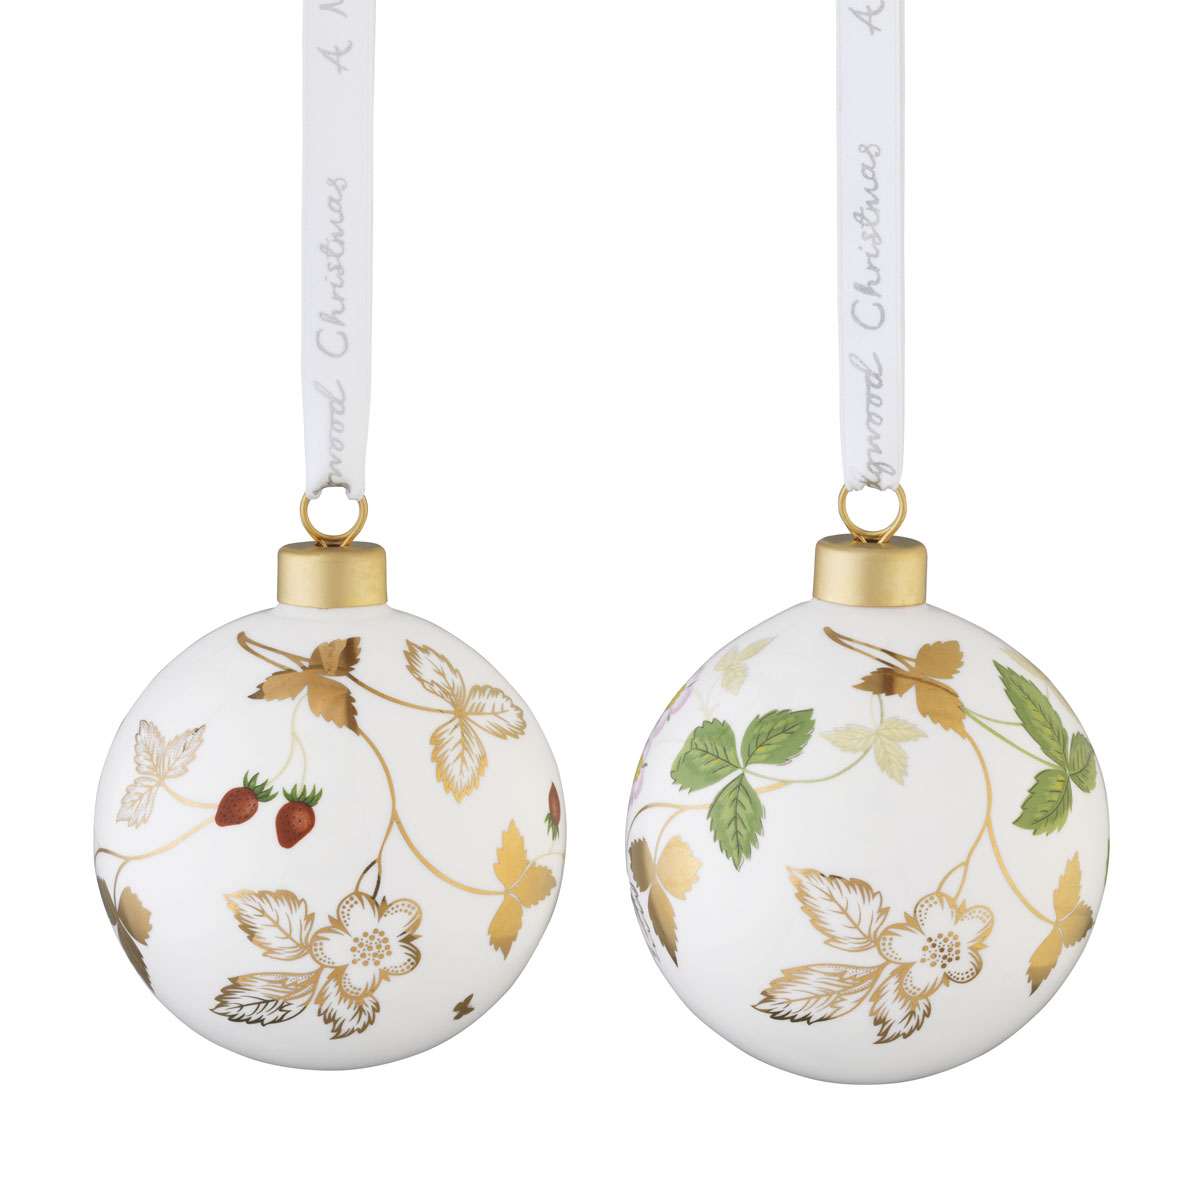 Wedgwood Wild Strawberry Bauble Ornament Pair